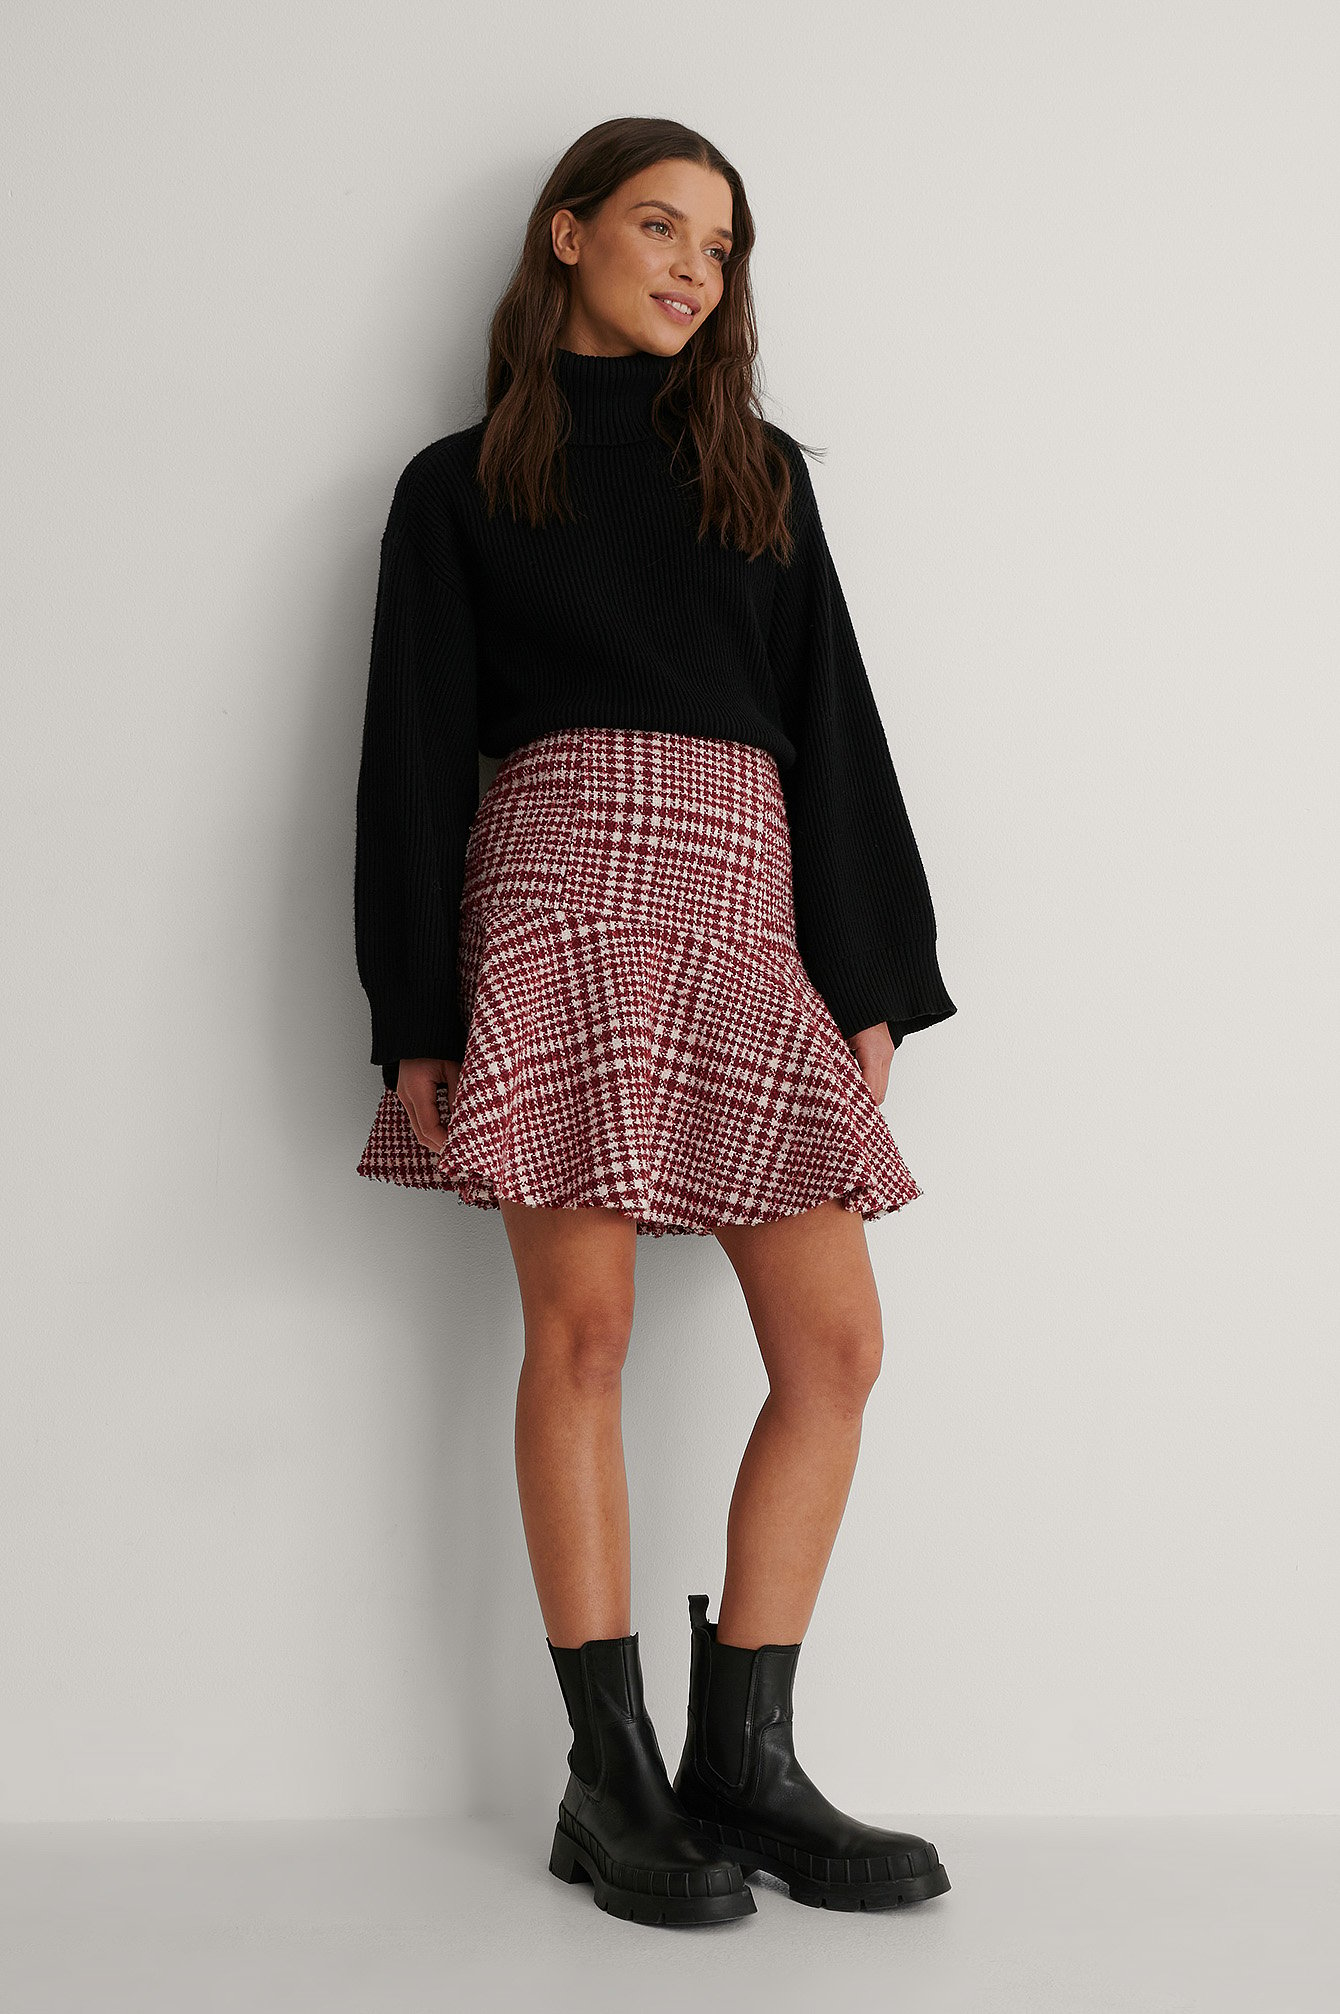 Dogtooth Tweed Skirt Outfit.